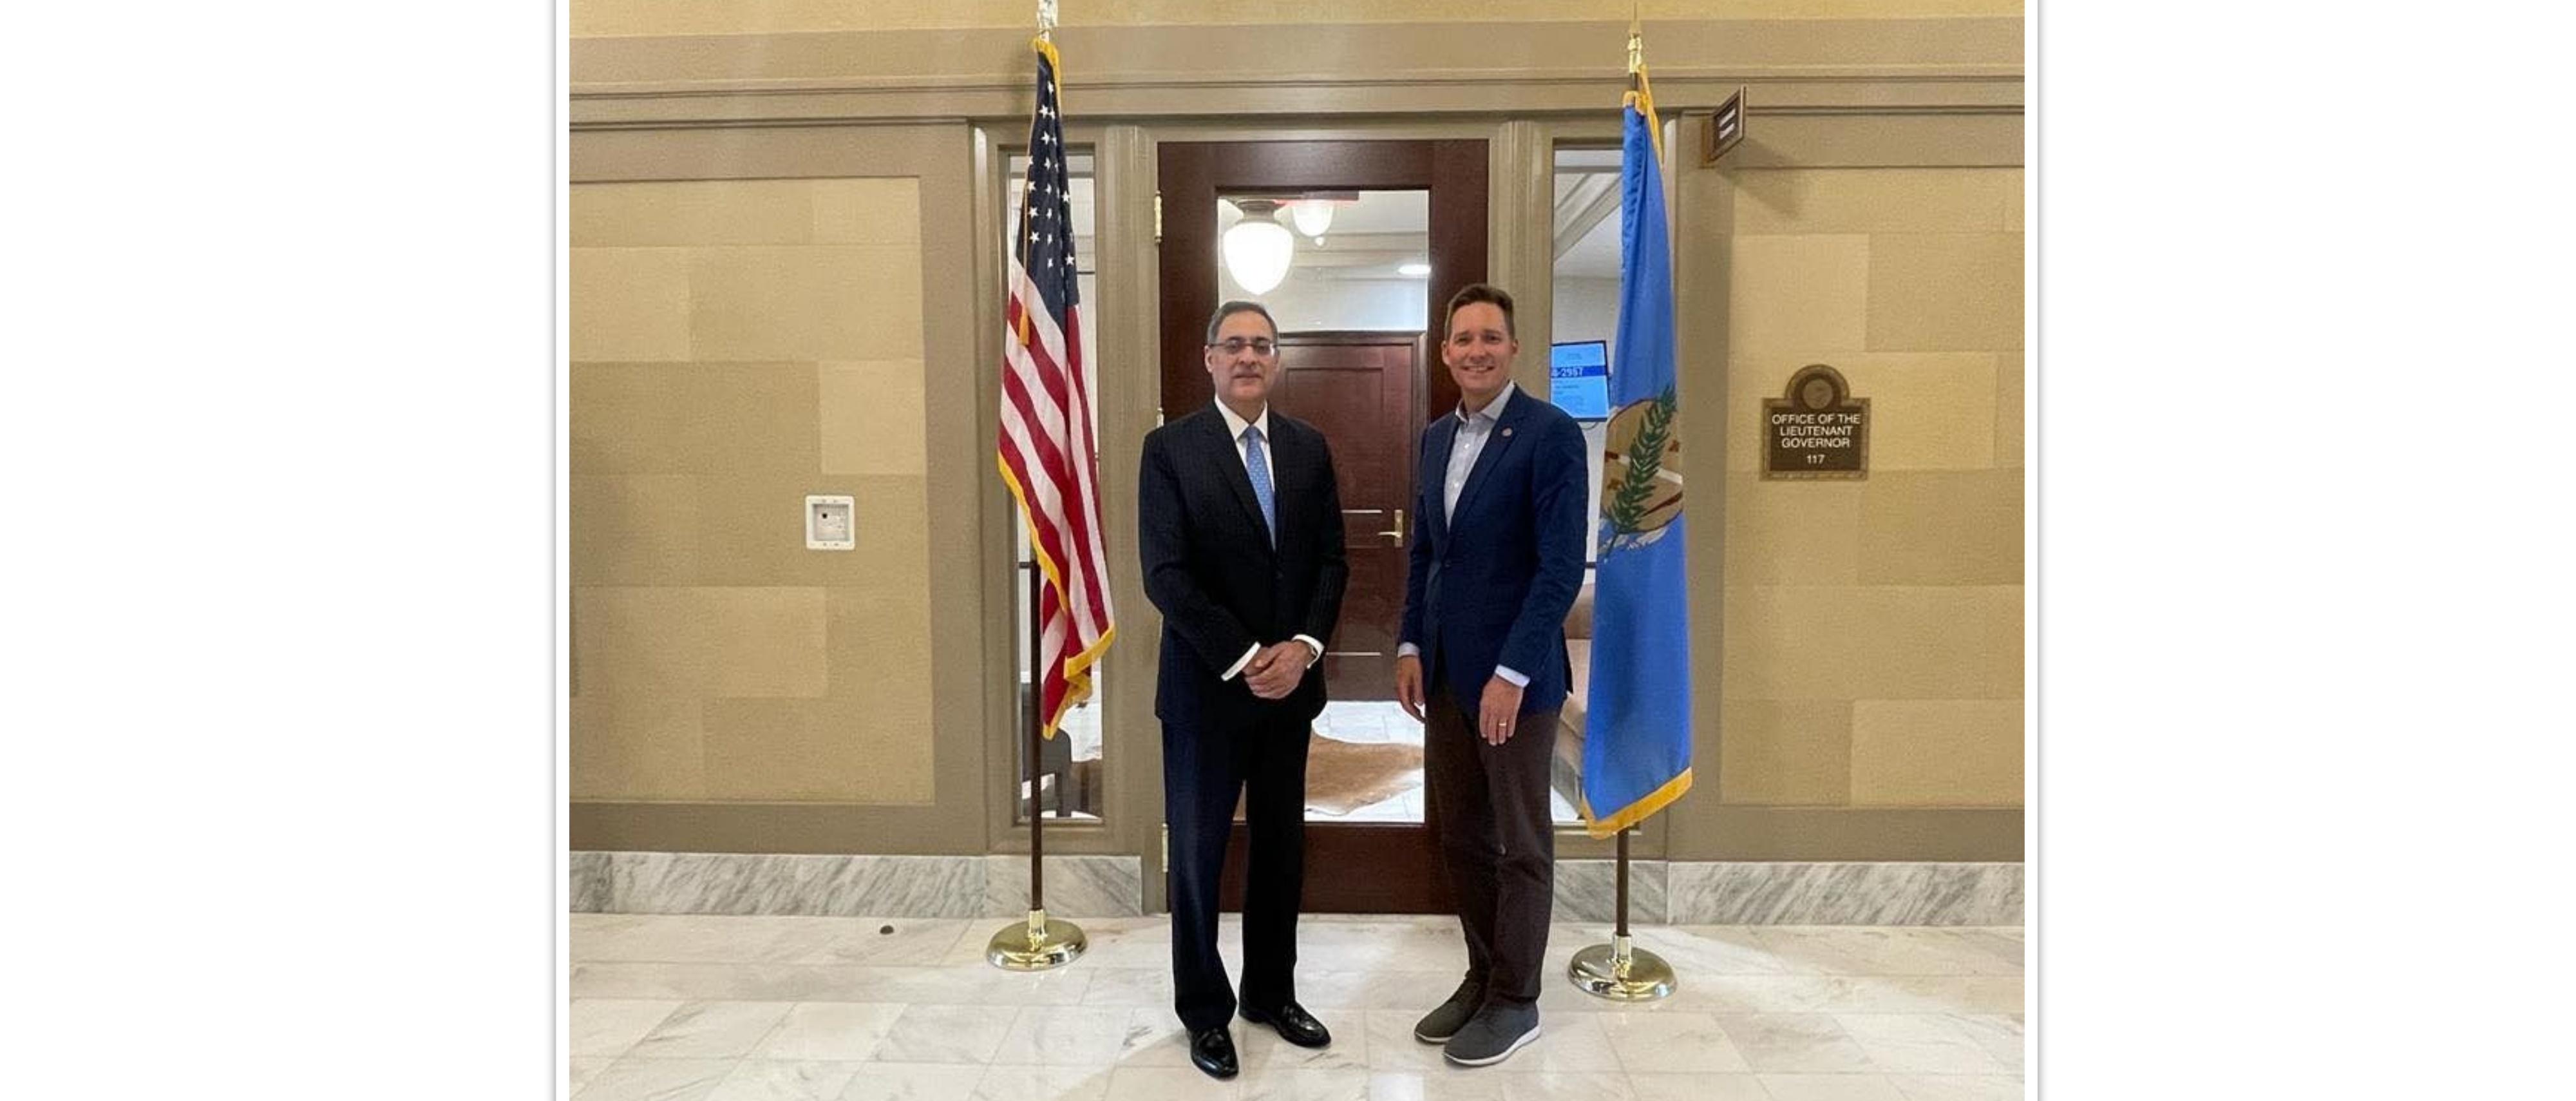  Consul General met Lt. Governor of Oklahoma Lt Governor Pinnell on May 13, 2022